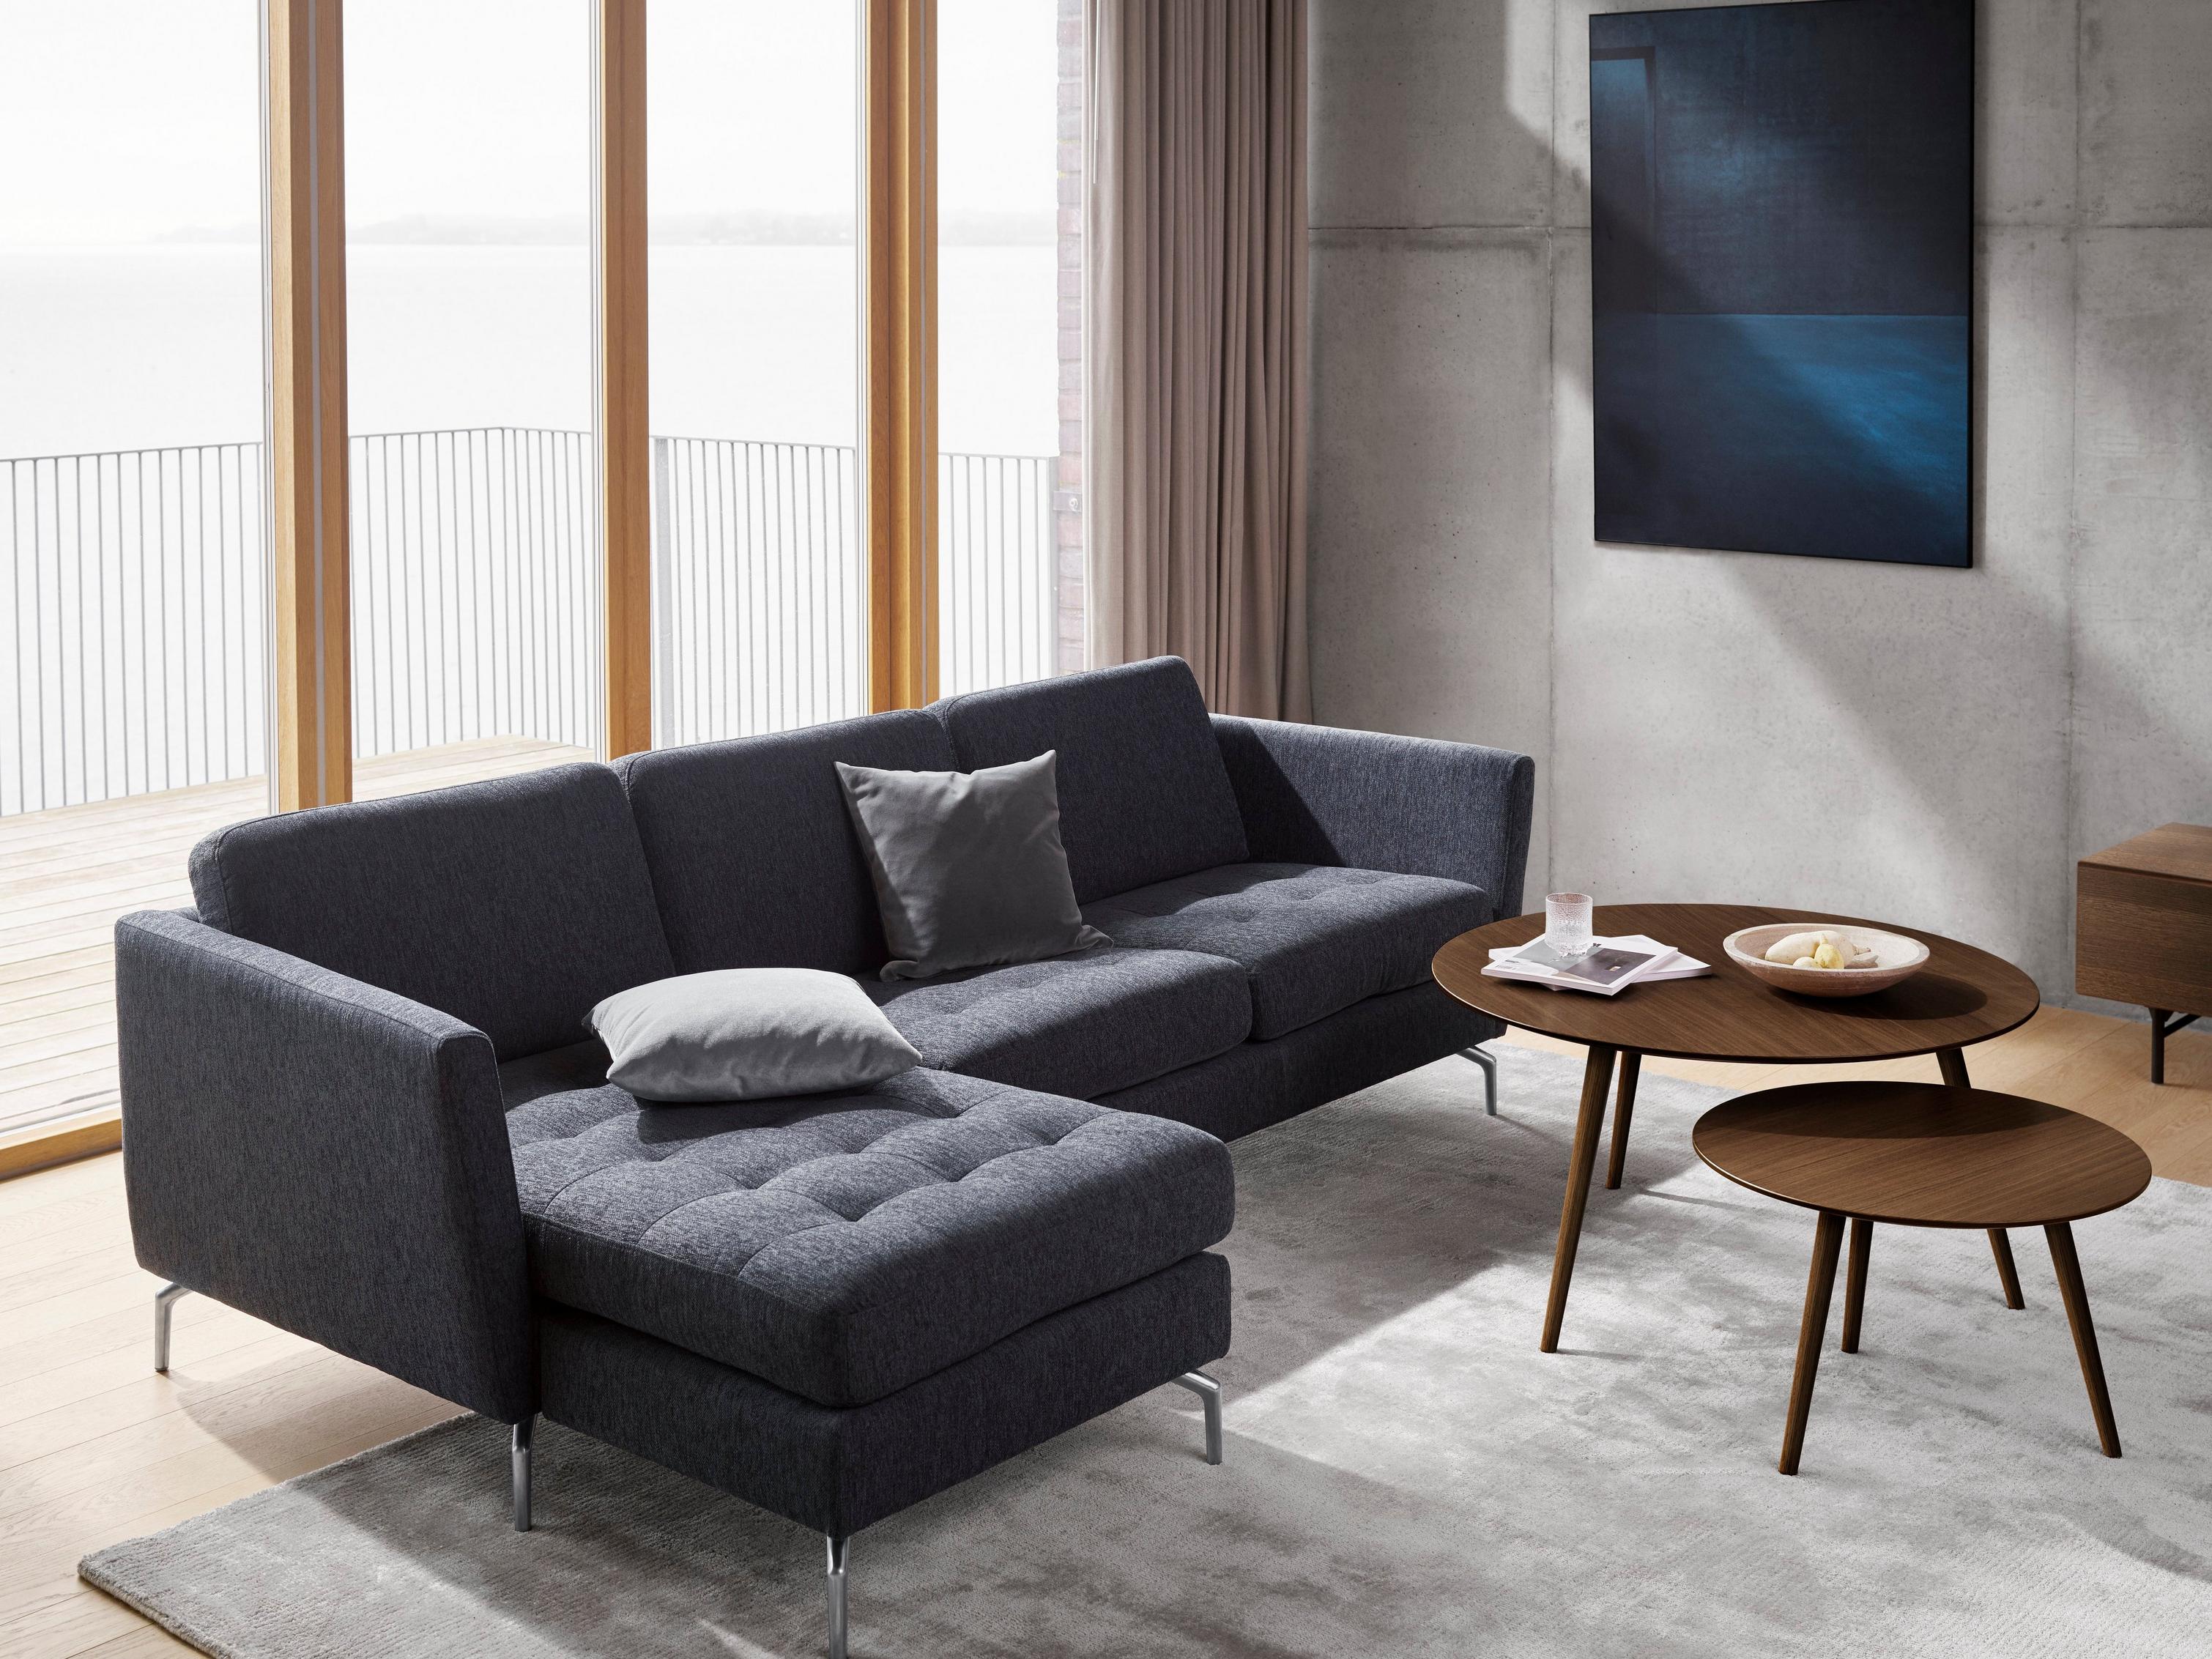 Relaxing living room with the Osaka sofa in blue Bristol and the Bornholm coffee table in dark oak veneer.